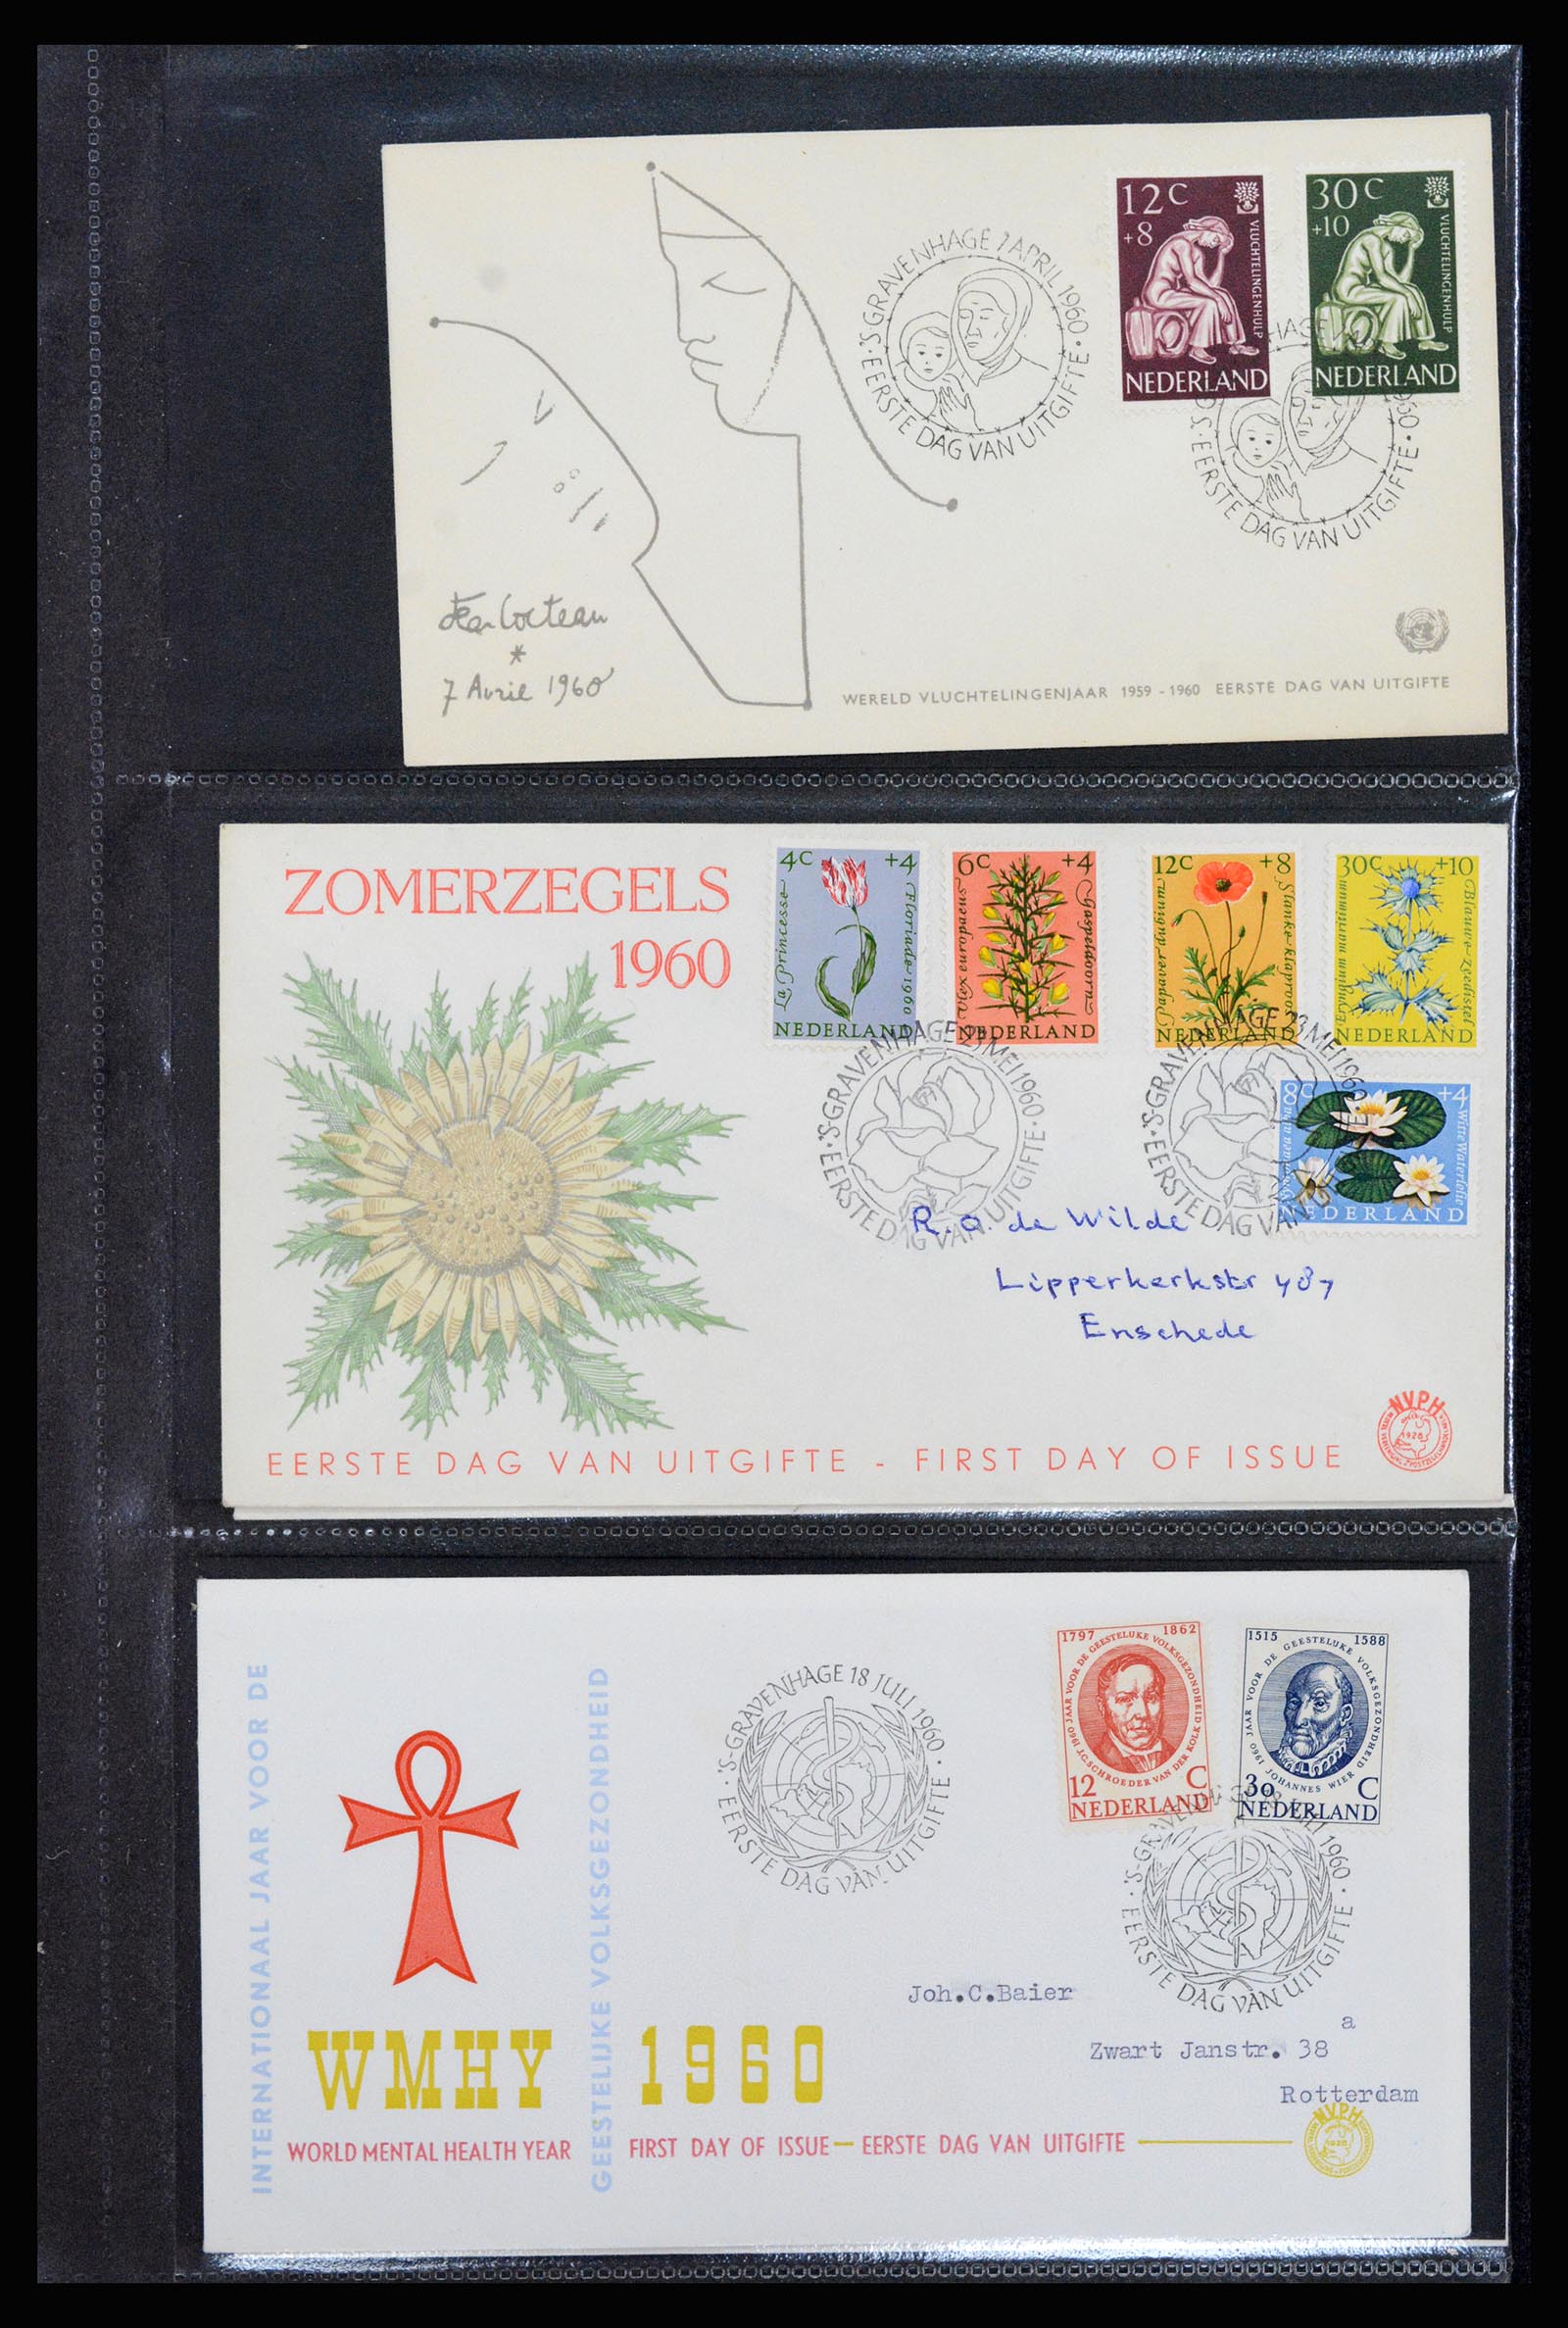 37264 015 - Stamp collection 37264 Netherlands FDC's 1950-1975.